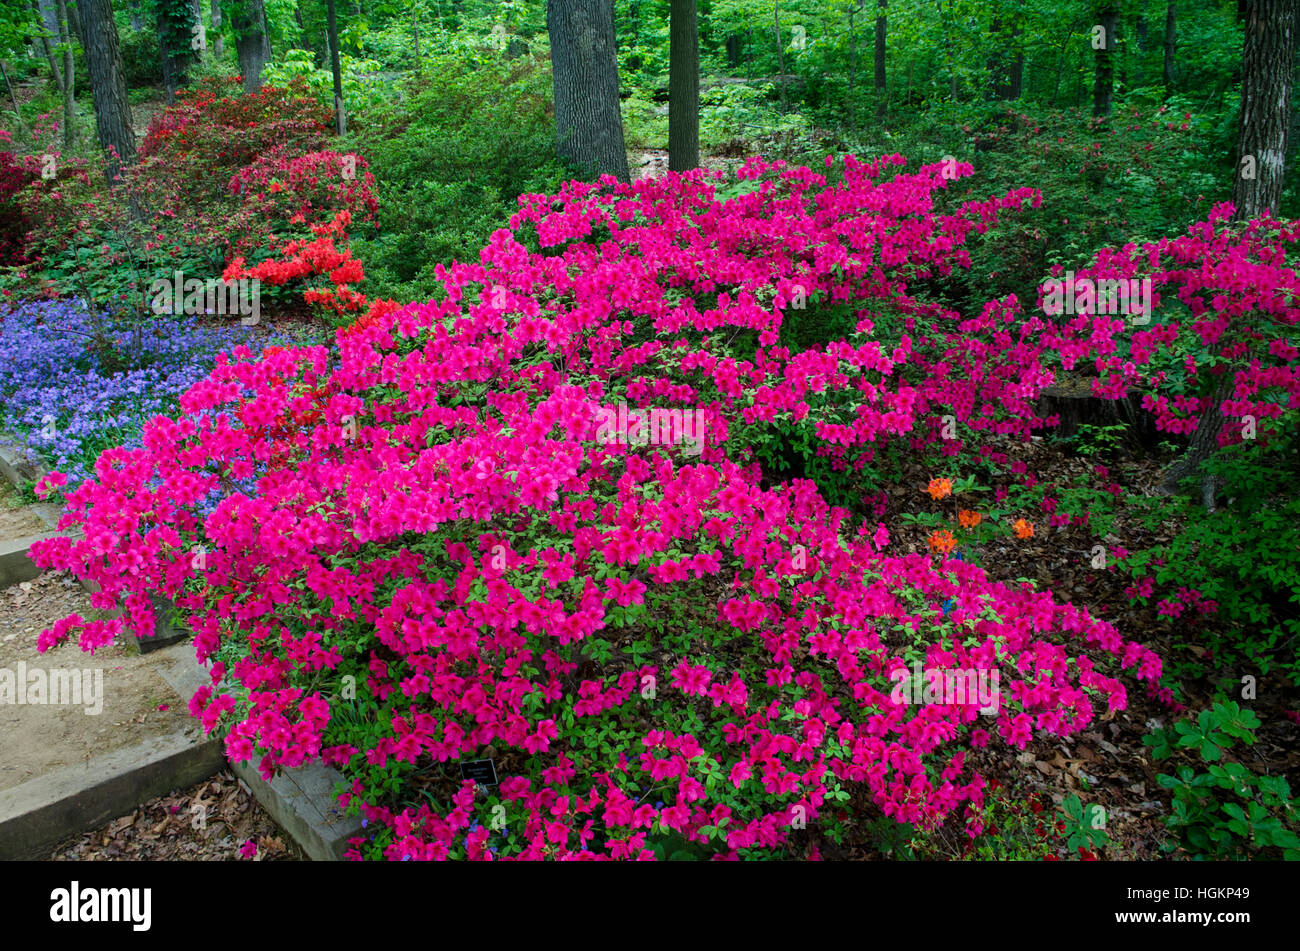 azaleas and other shade loving plants bloom profusely in the National Arboretum Azalea Collection. Stock Photo